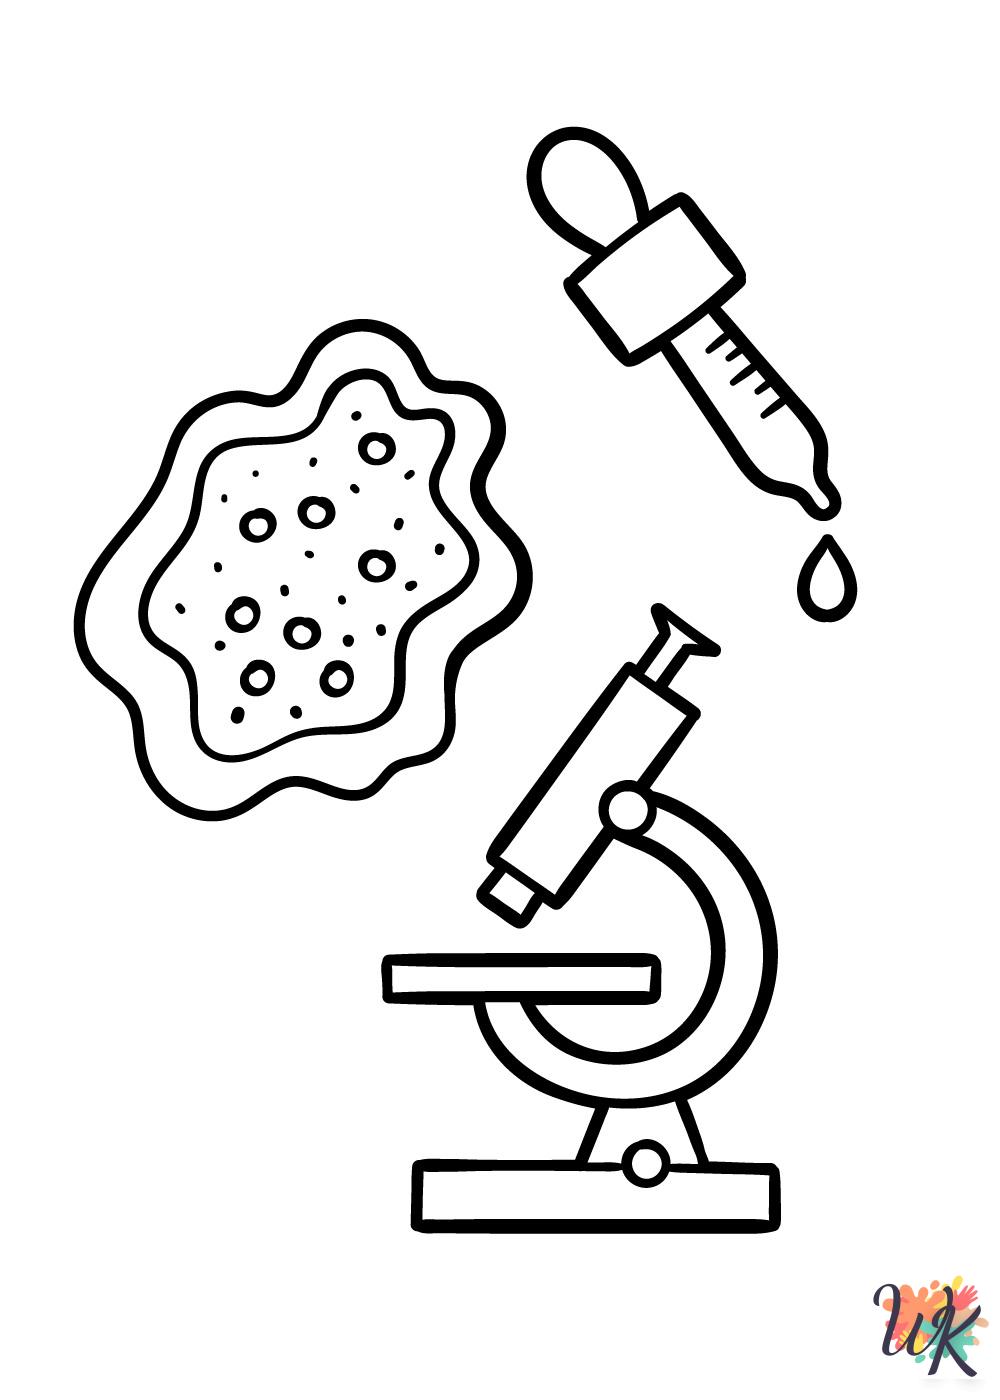 Science coloring pages to print